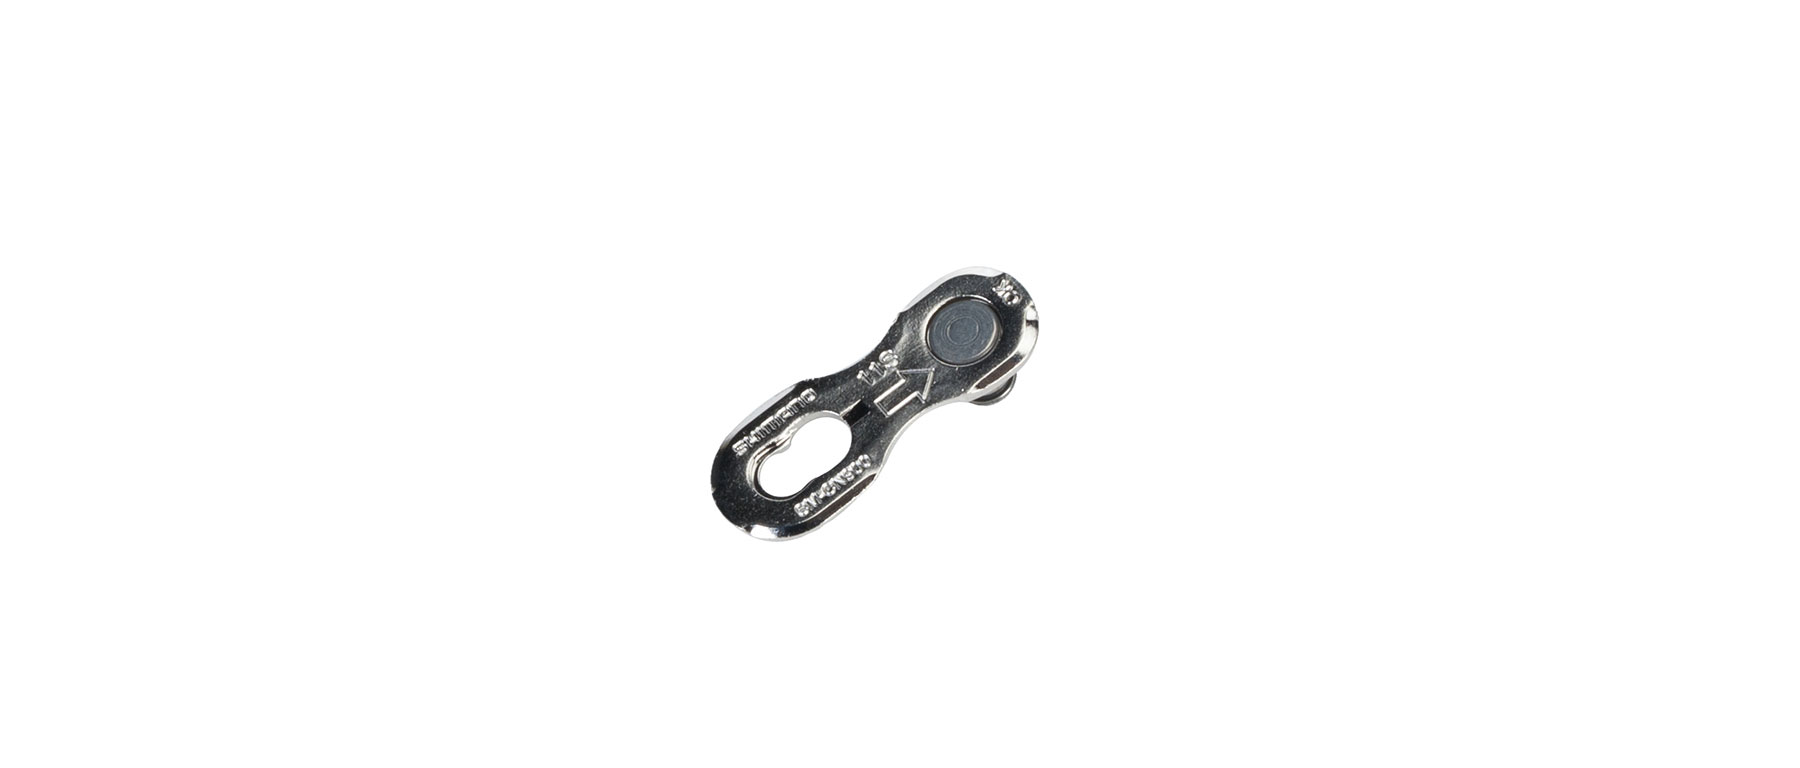 Shimano SM-CN900-11 11-Speed Quick-Link 2-Pack